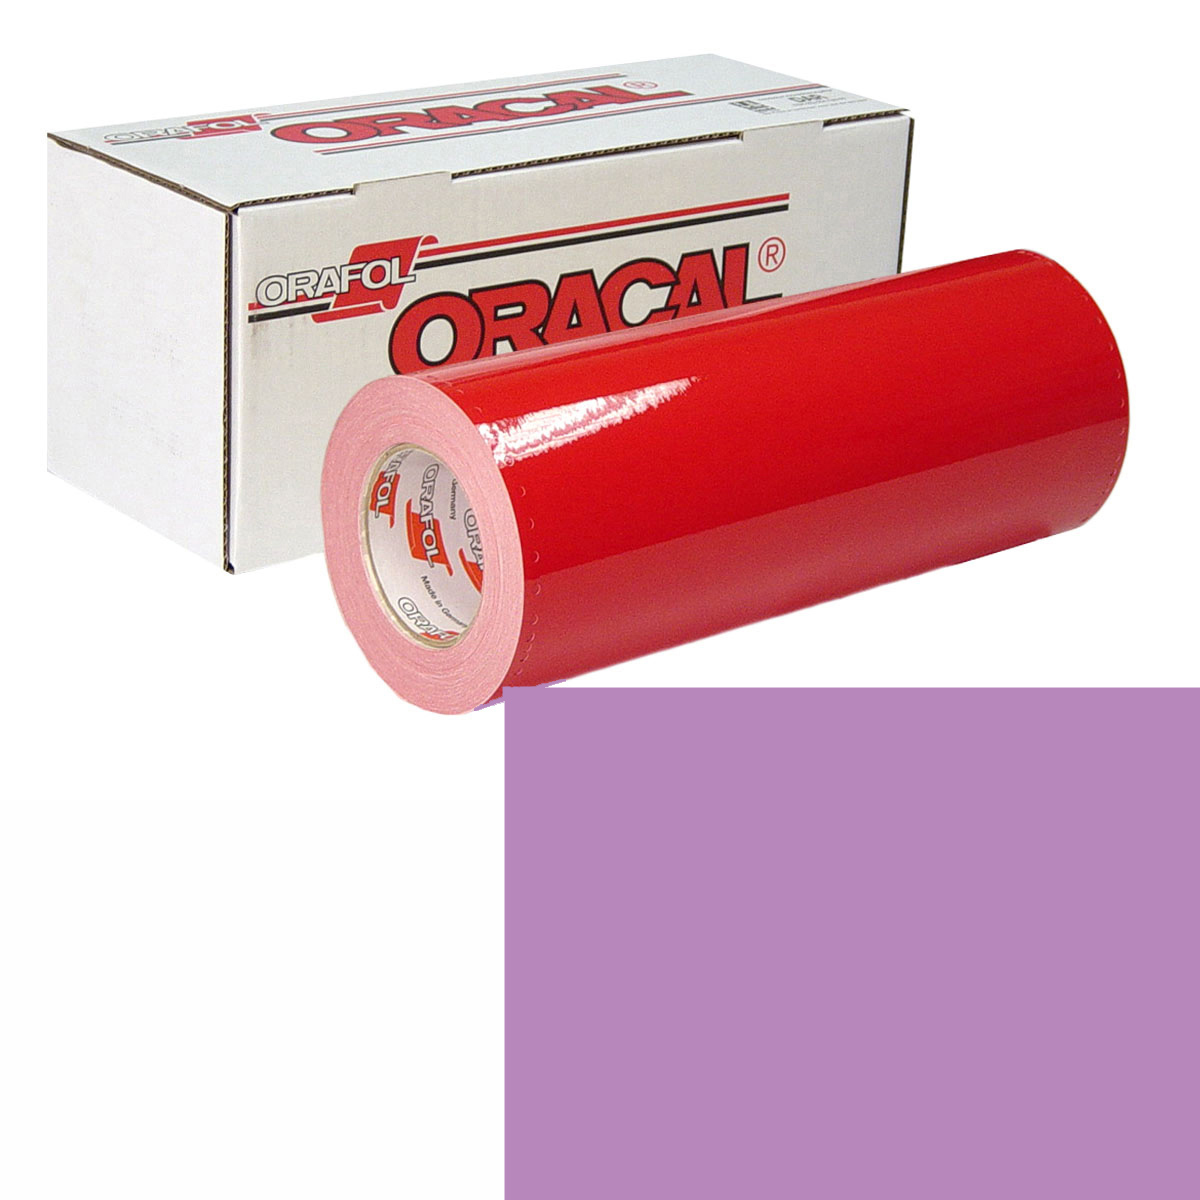 ORACAL 951 30in X 10yd 409 Pale Lilac